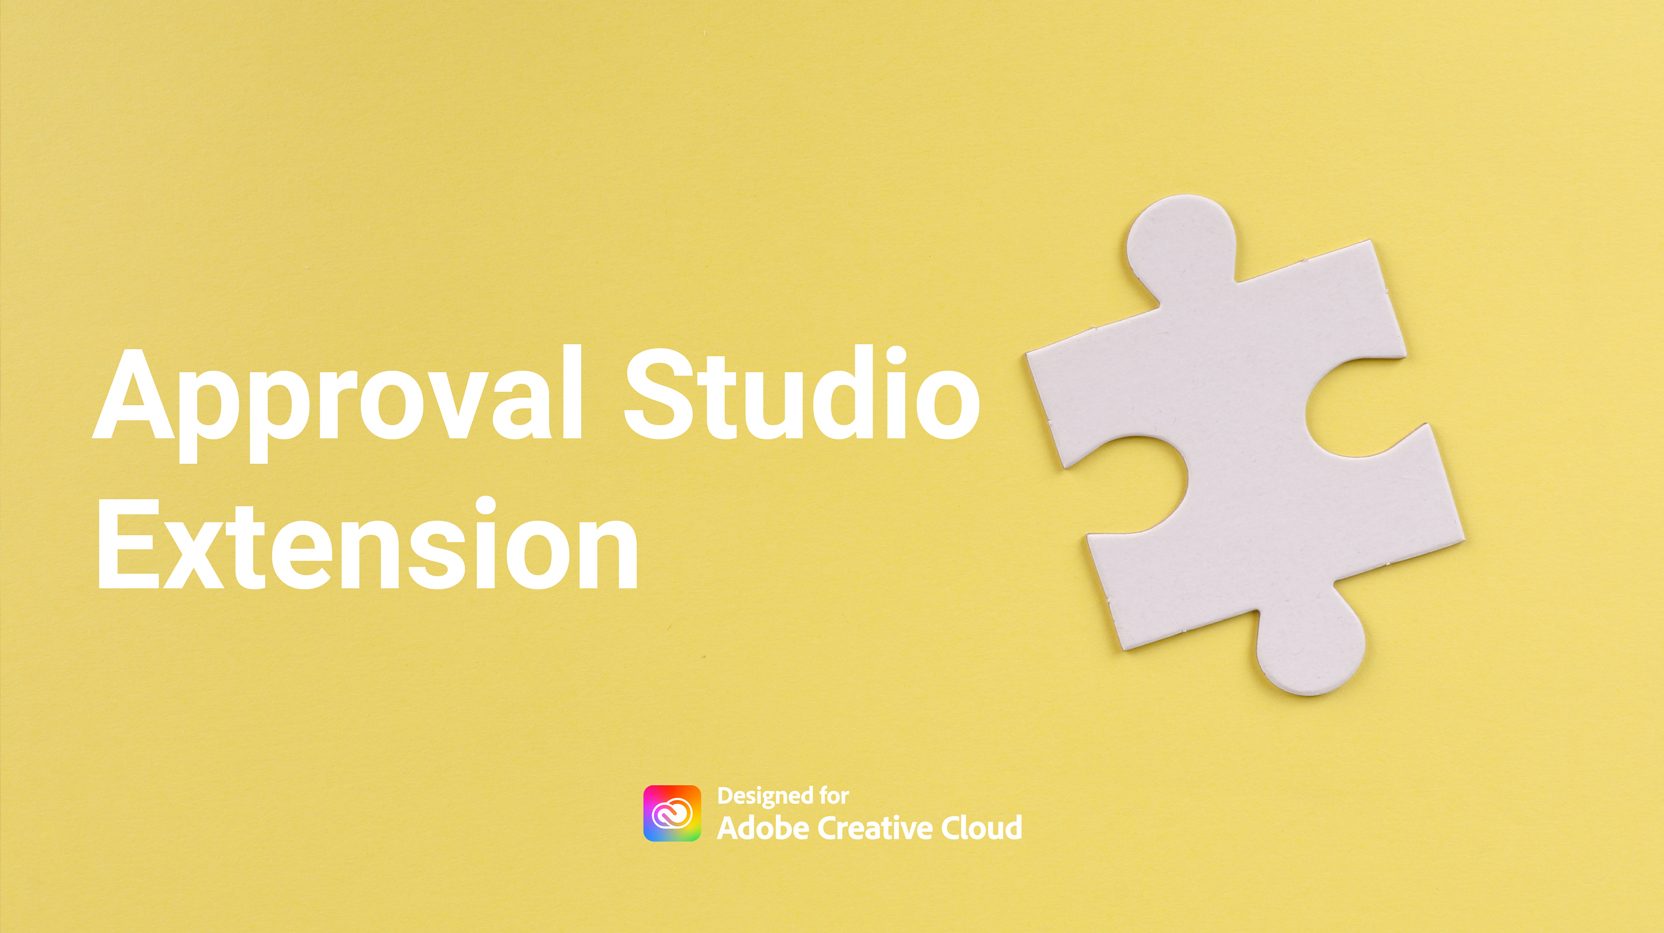 adobe approval studio extension banner